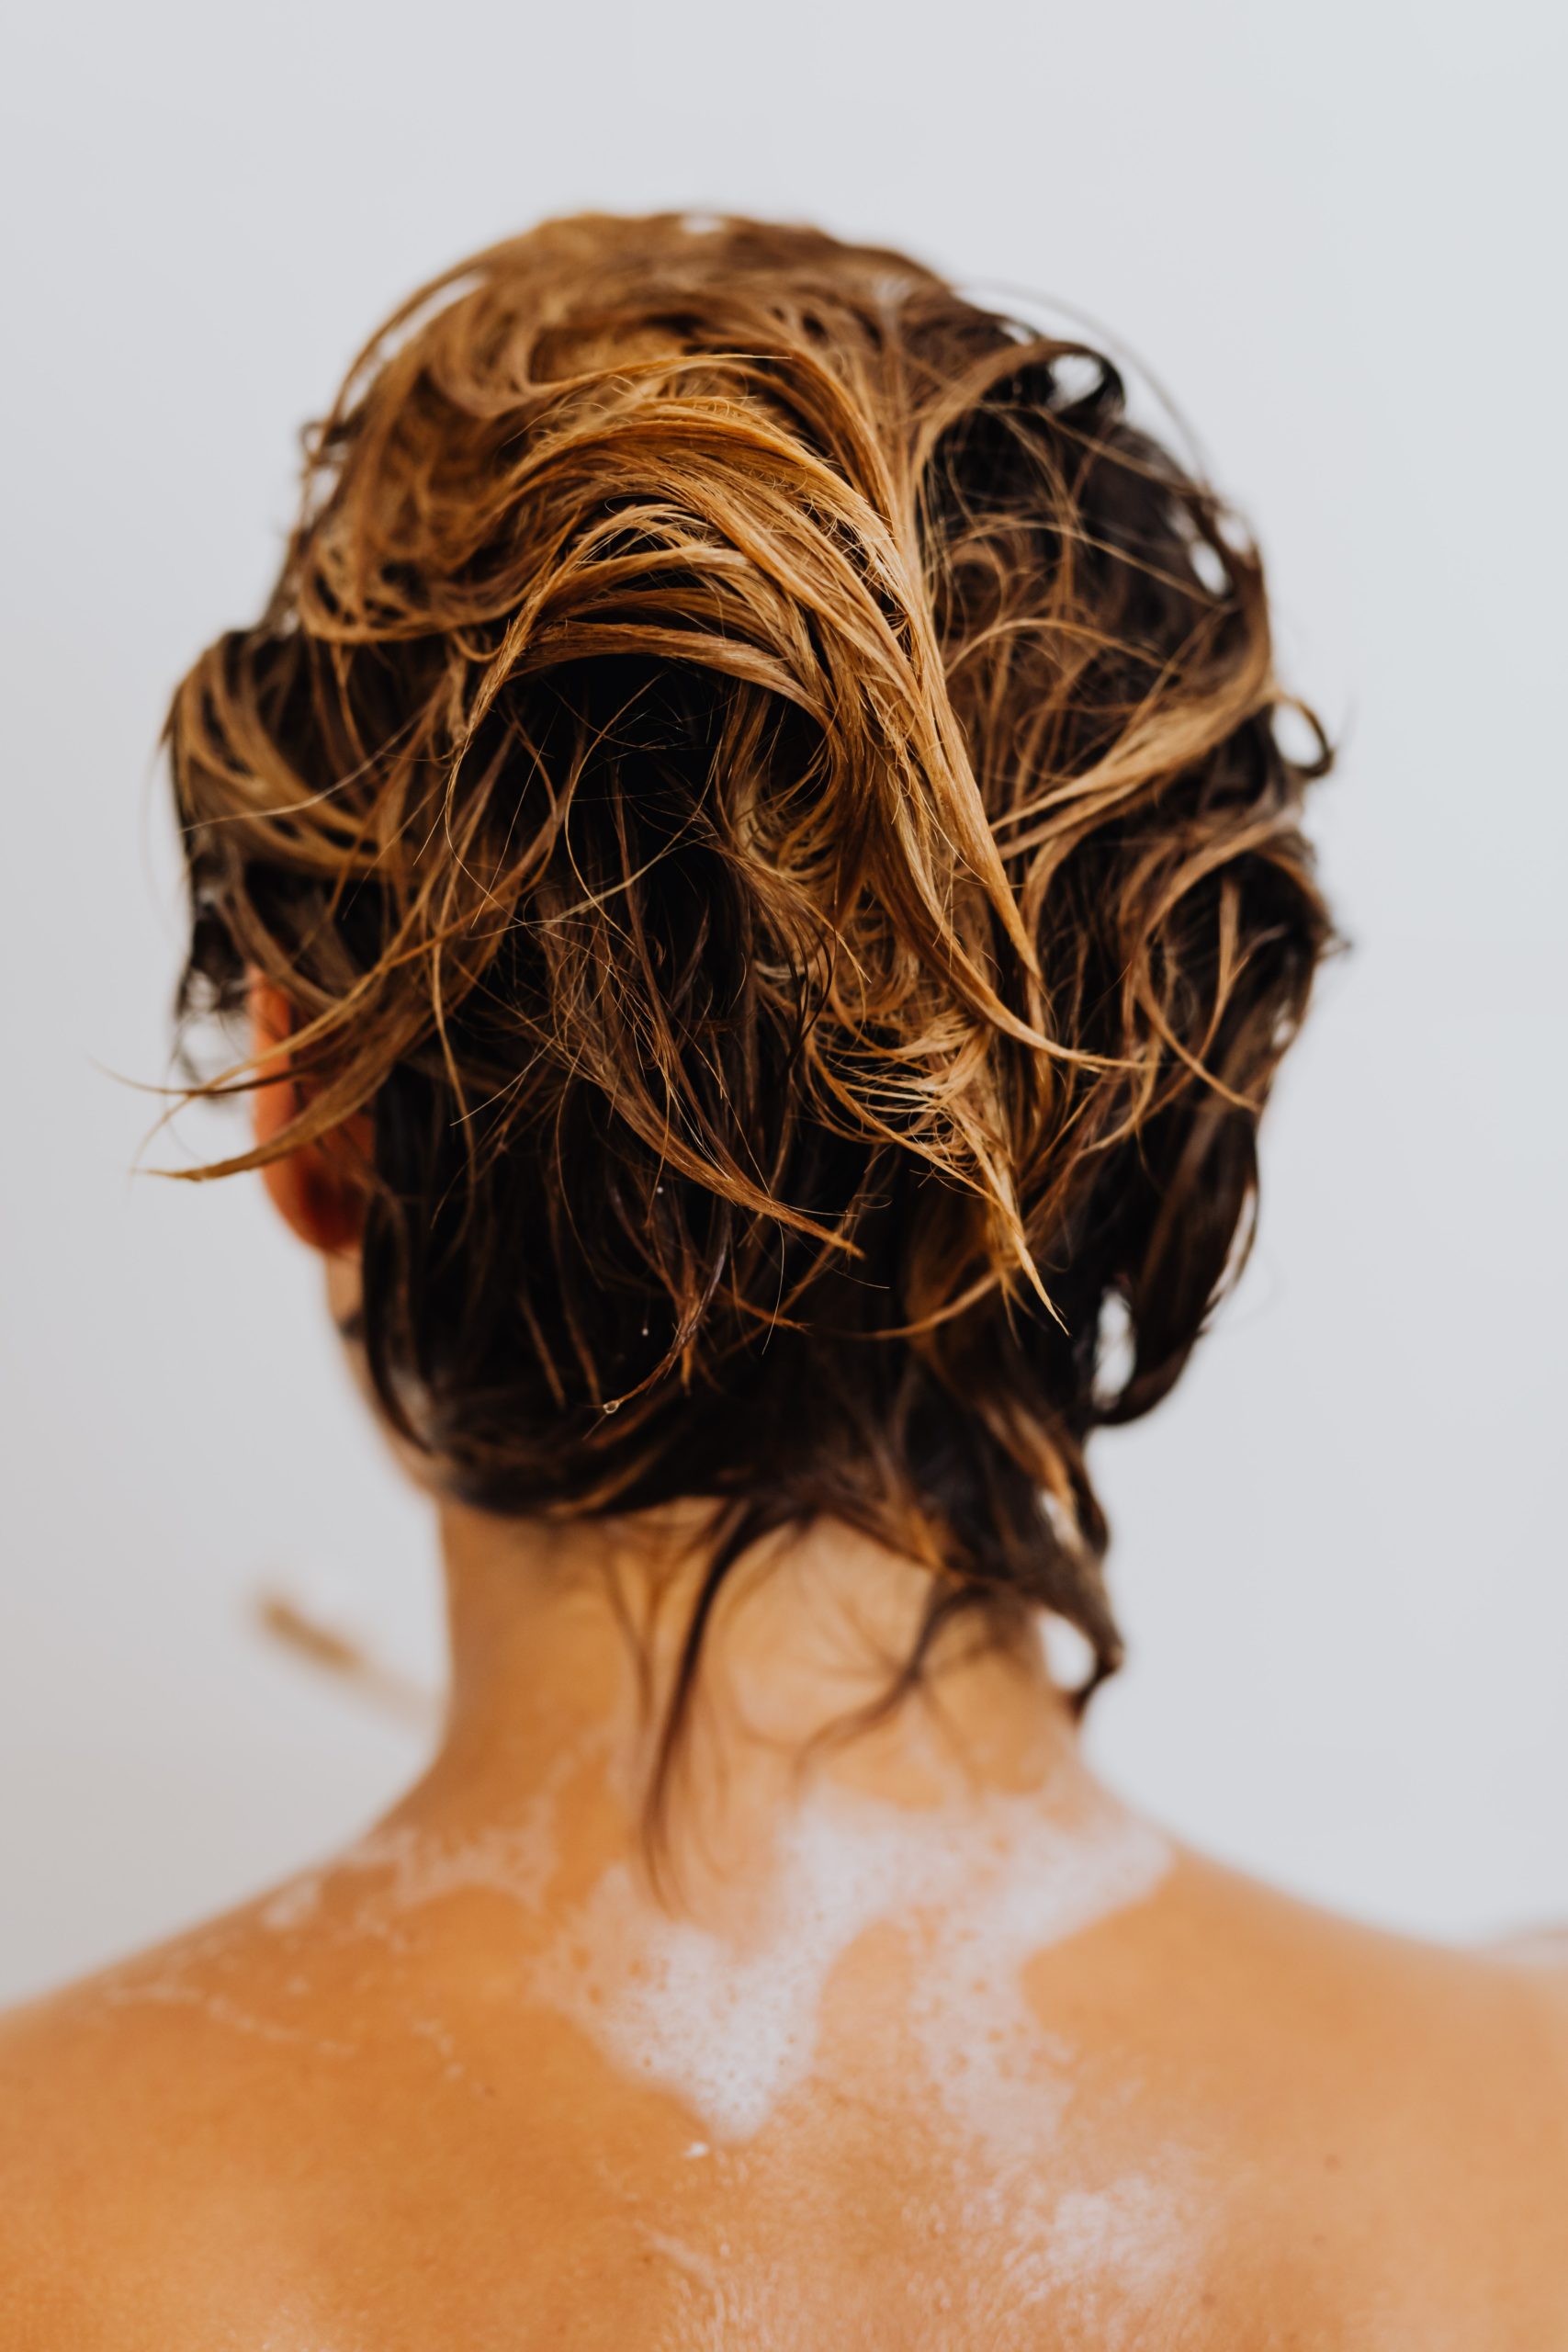 My Hair Won't Take Color- Why and What to do about it - The Exquisite Find